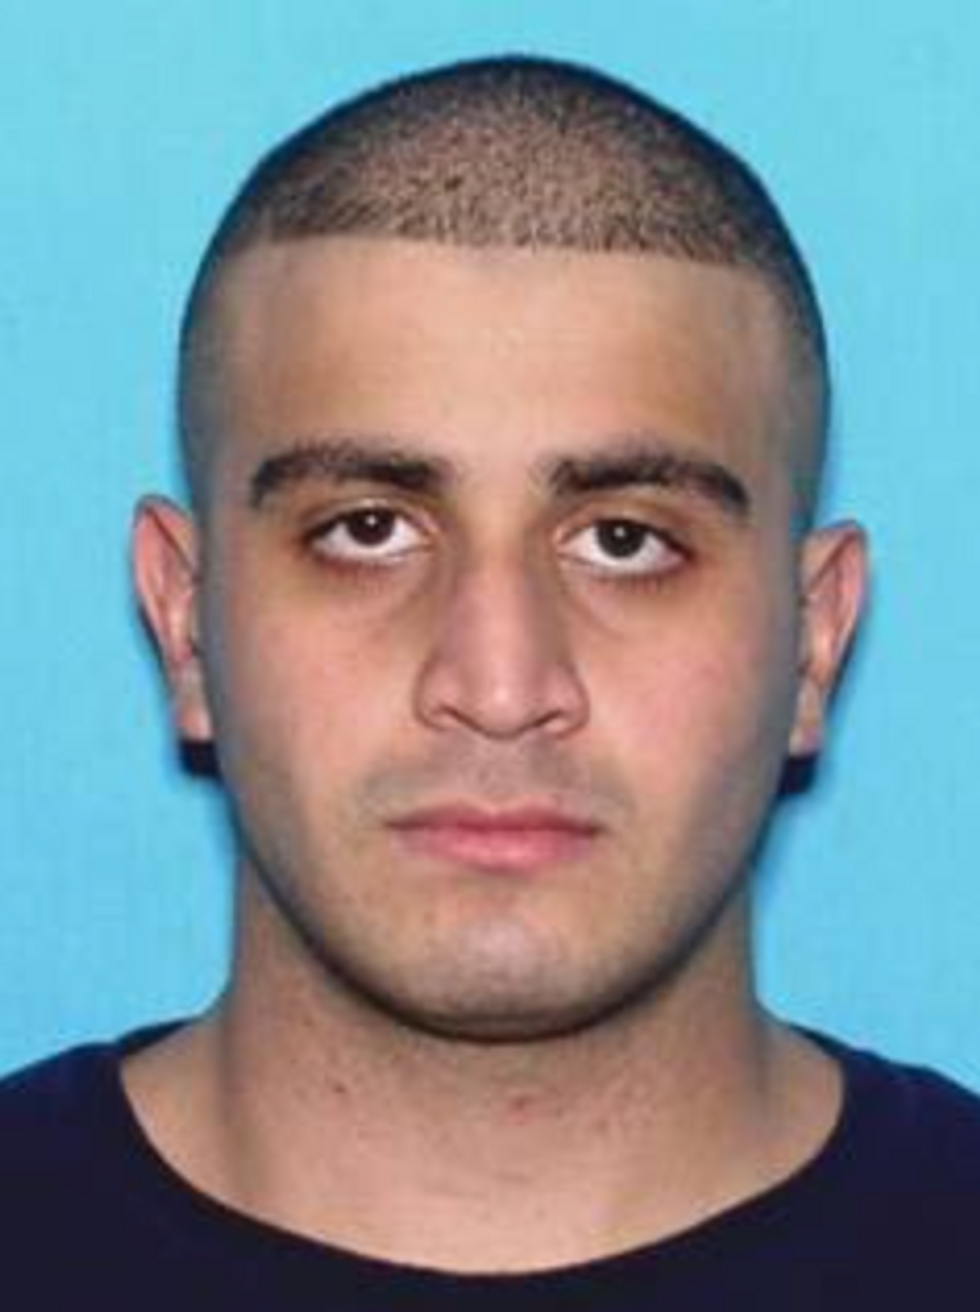 Here's What We Know About the Suspected Orlando Club Shooter Omar Mateen